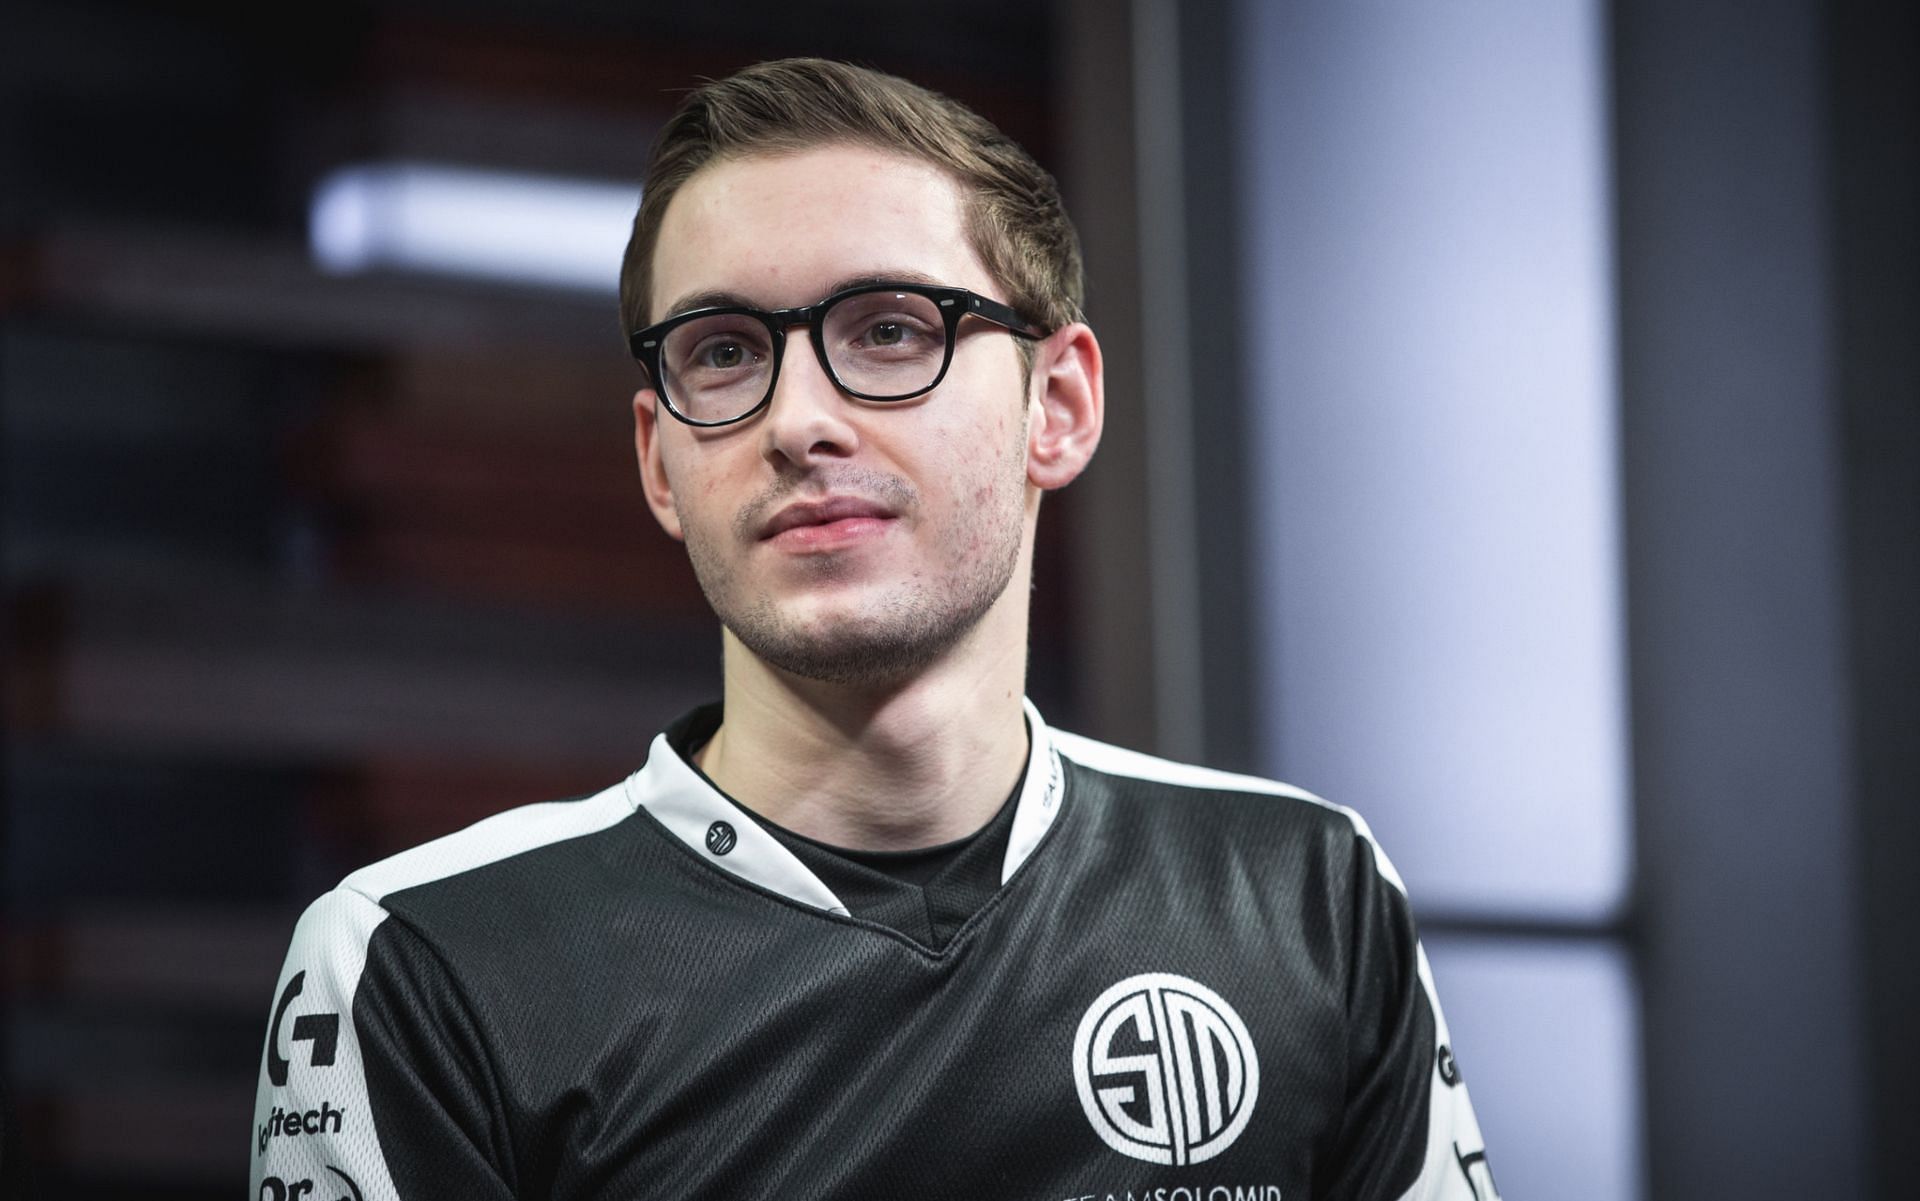 League of Legends star will reportedly join 100 Thieves for LCS 2023